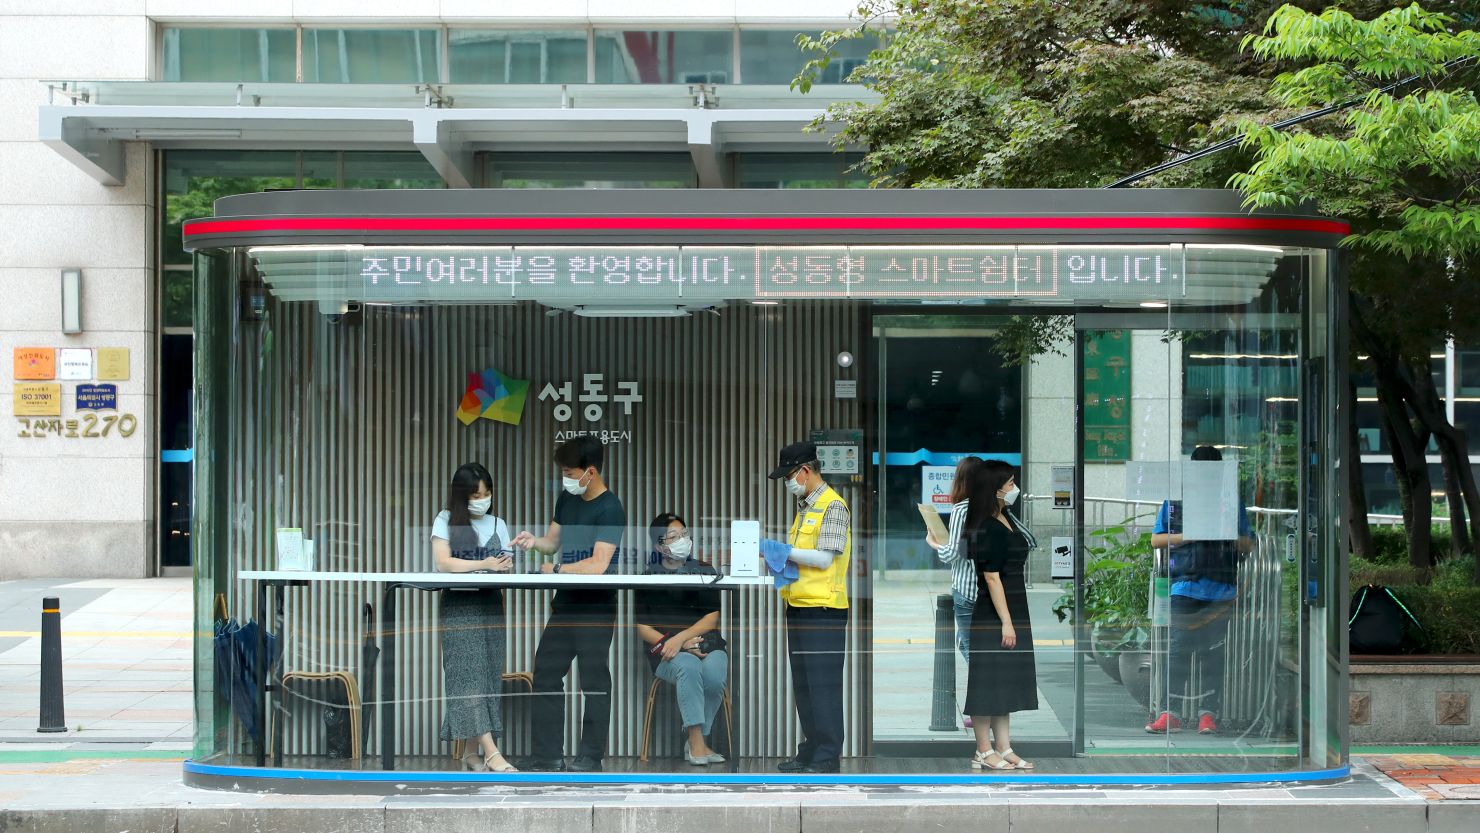 A Covid-19 bus shelter seen in Seoul's Seongdong district.